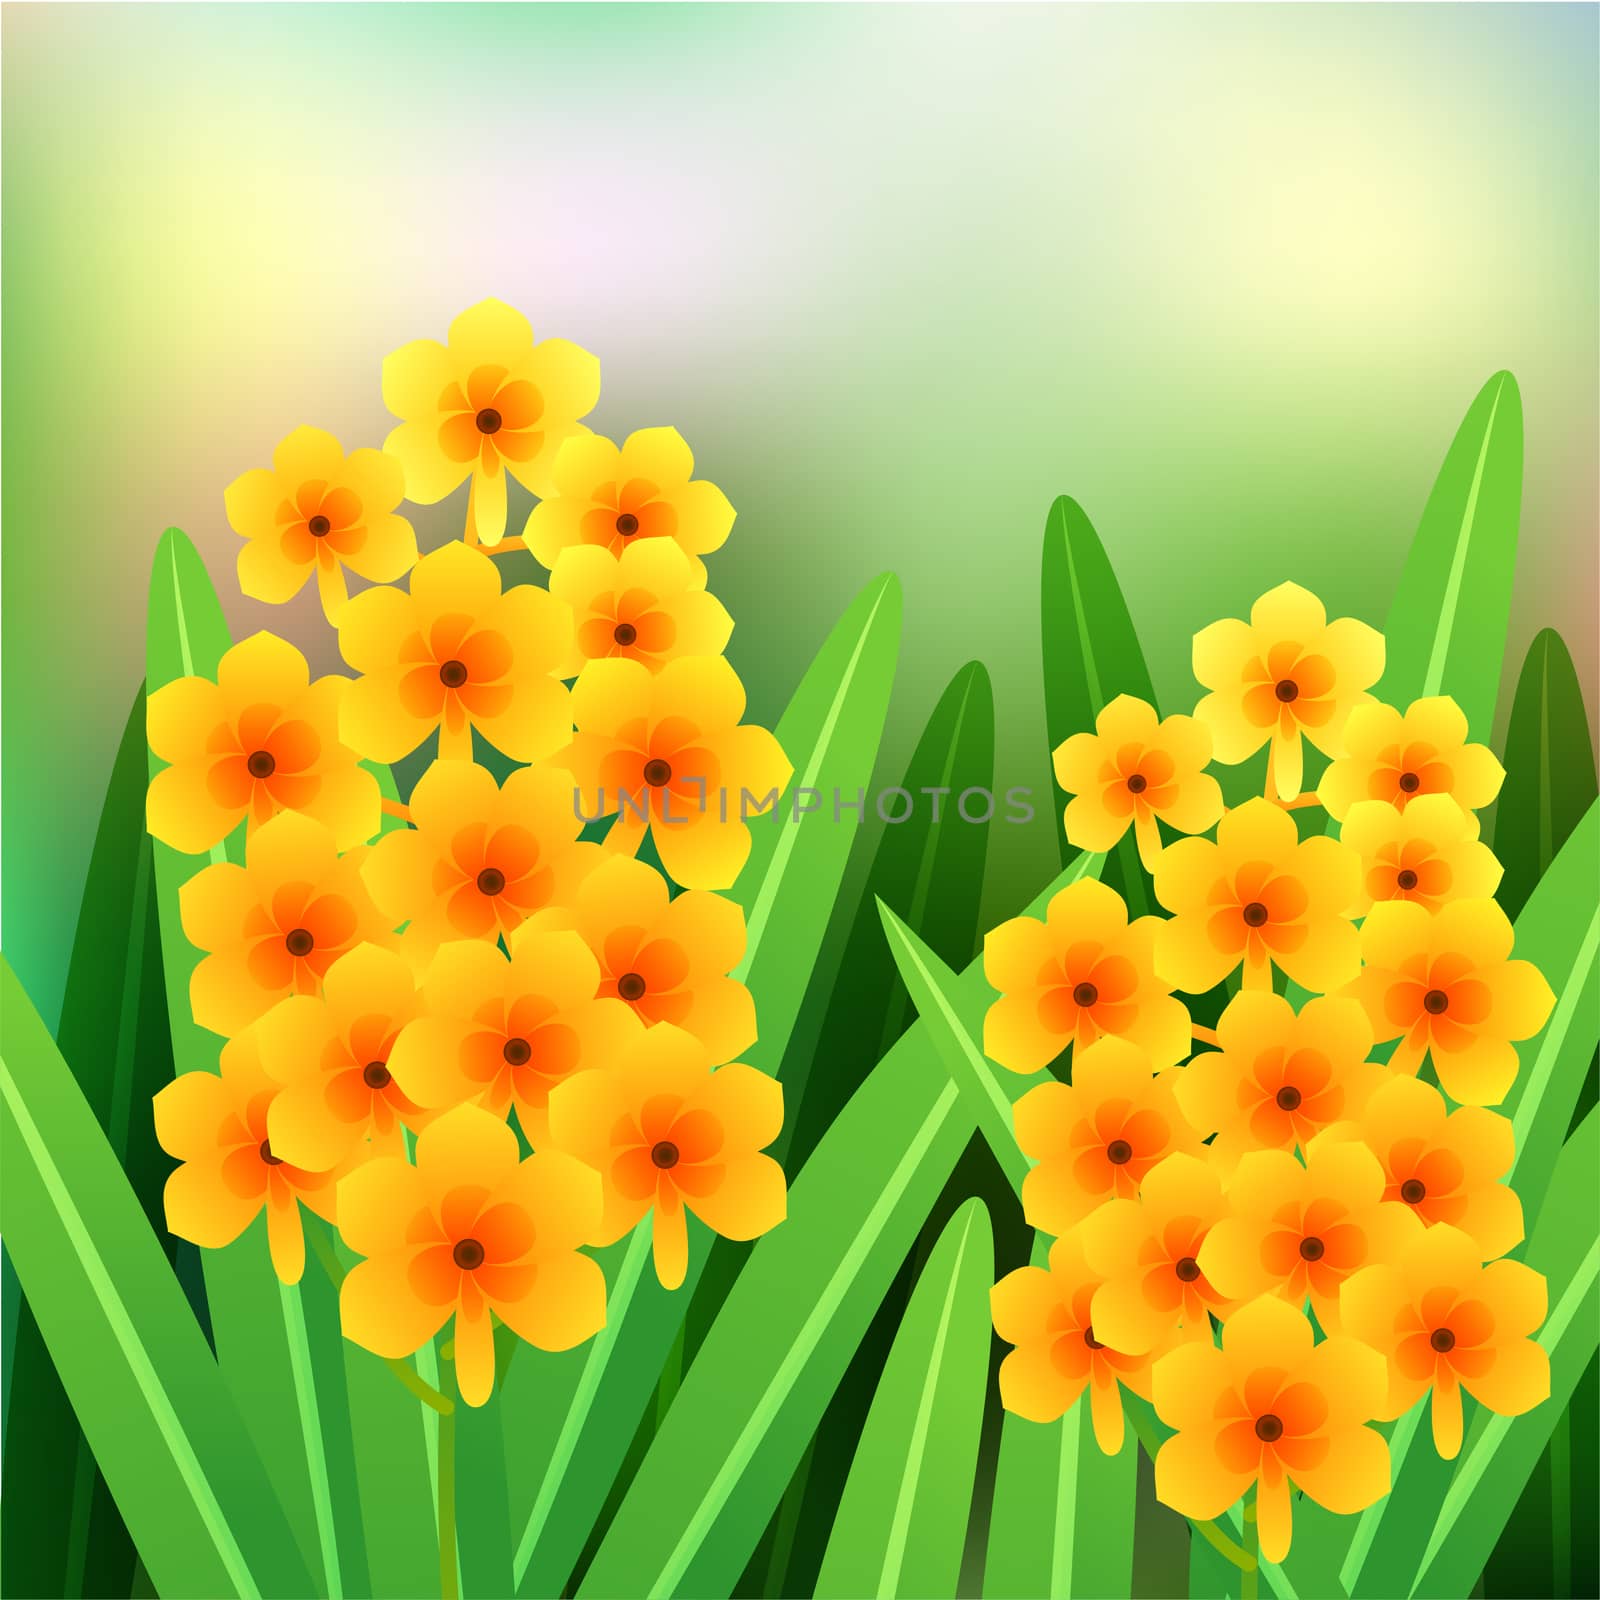 Orange Ascocentrum orchid flowers with green leaves and place for your text. illustration